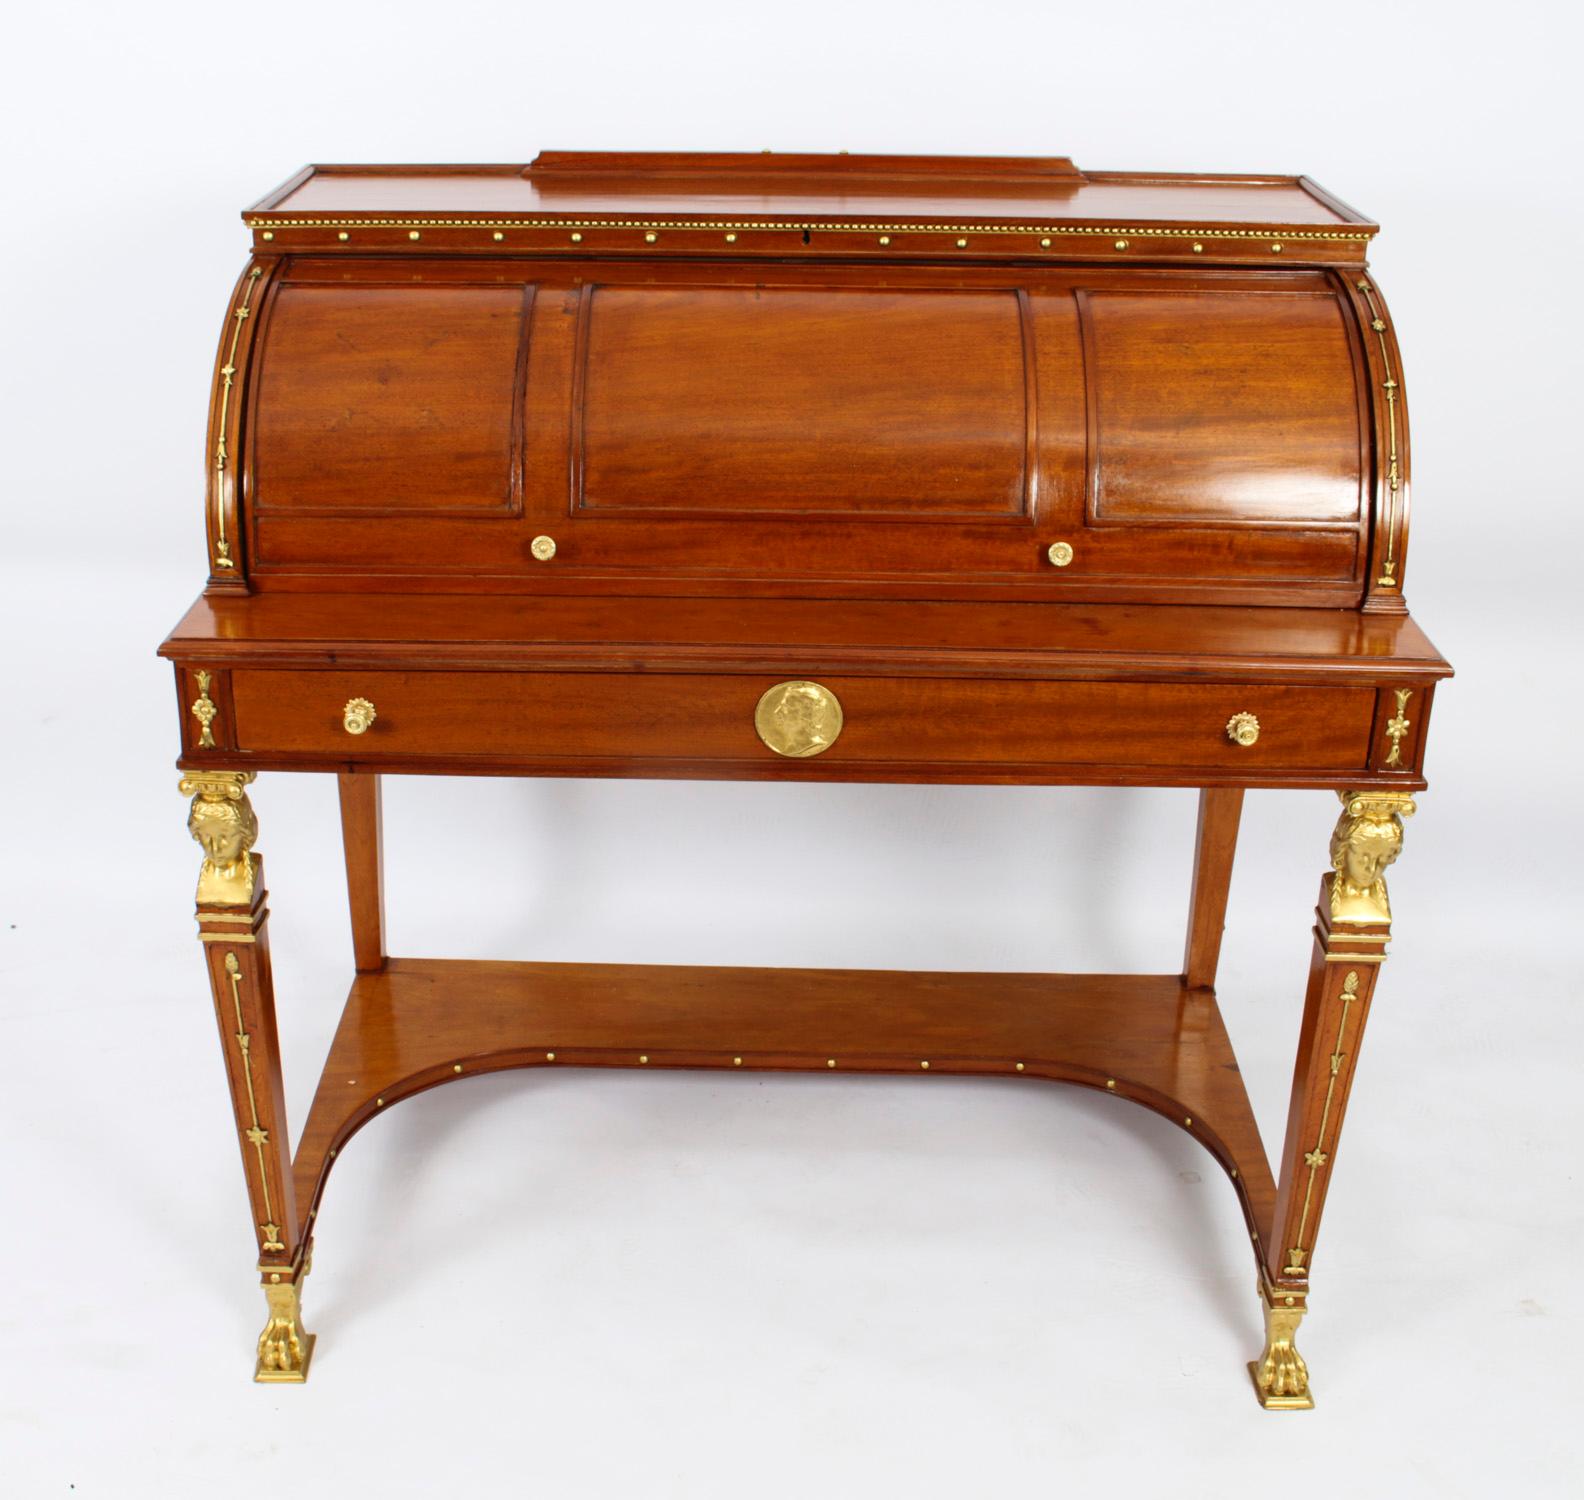 Antique French Empire Revival Cylinder Bureau, 19th Century For Sale 1